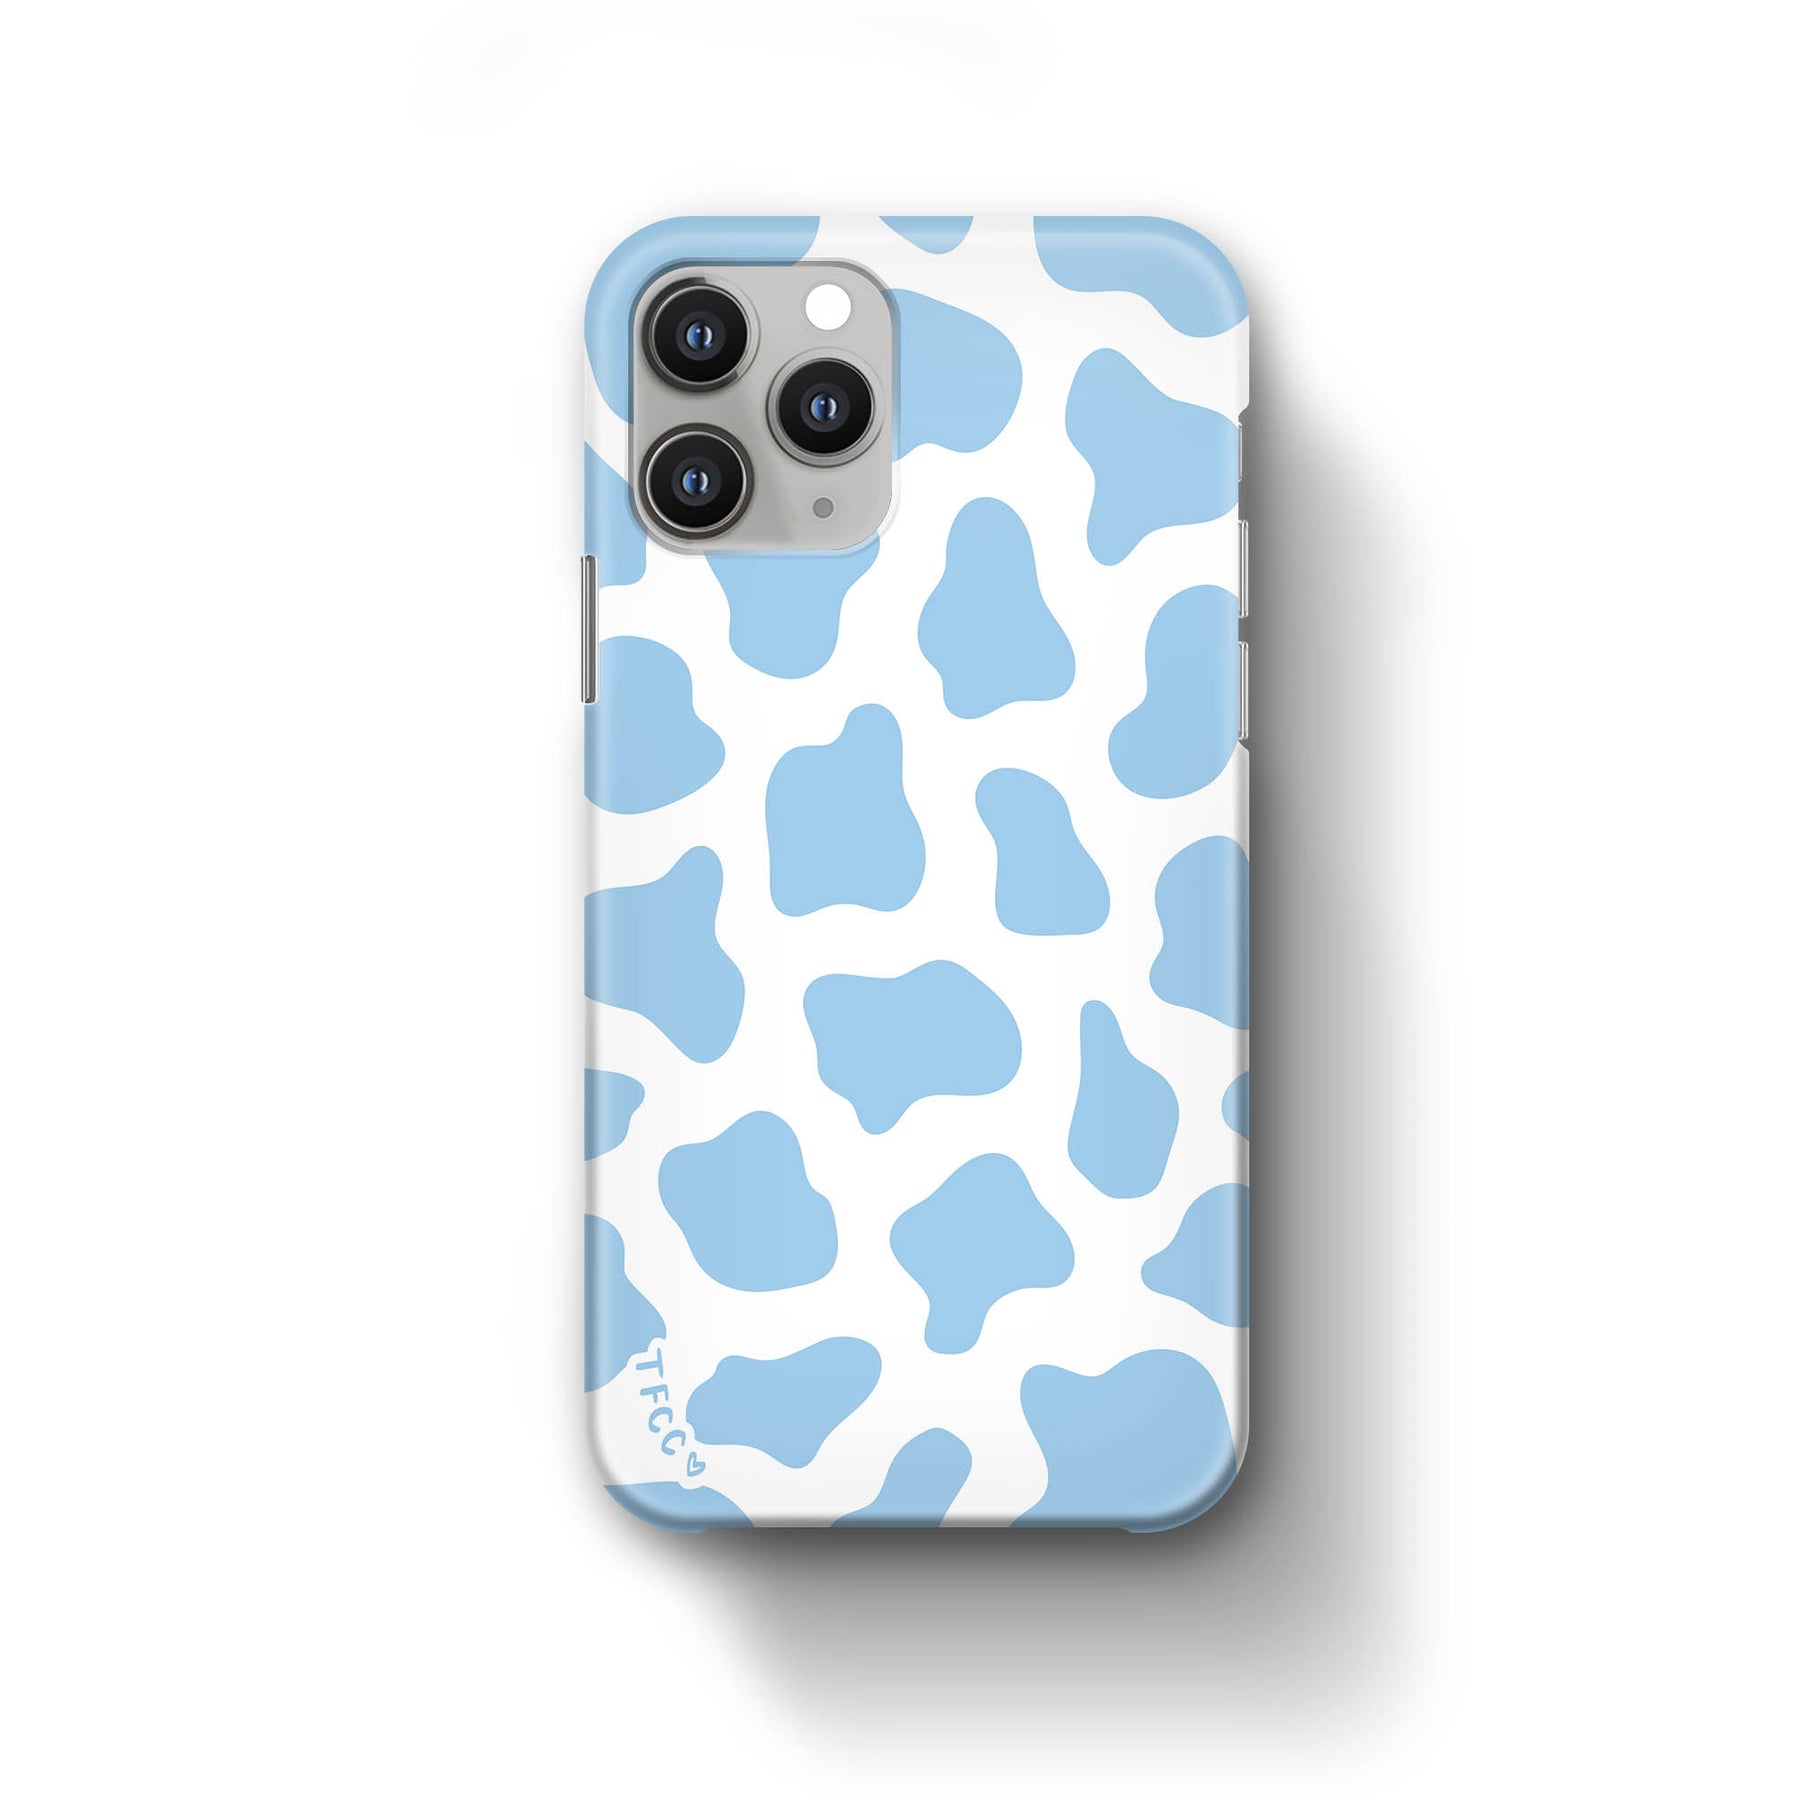 COW PRINT BLUE CASE - thefonecasecompany